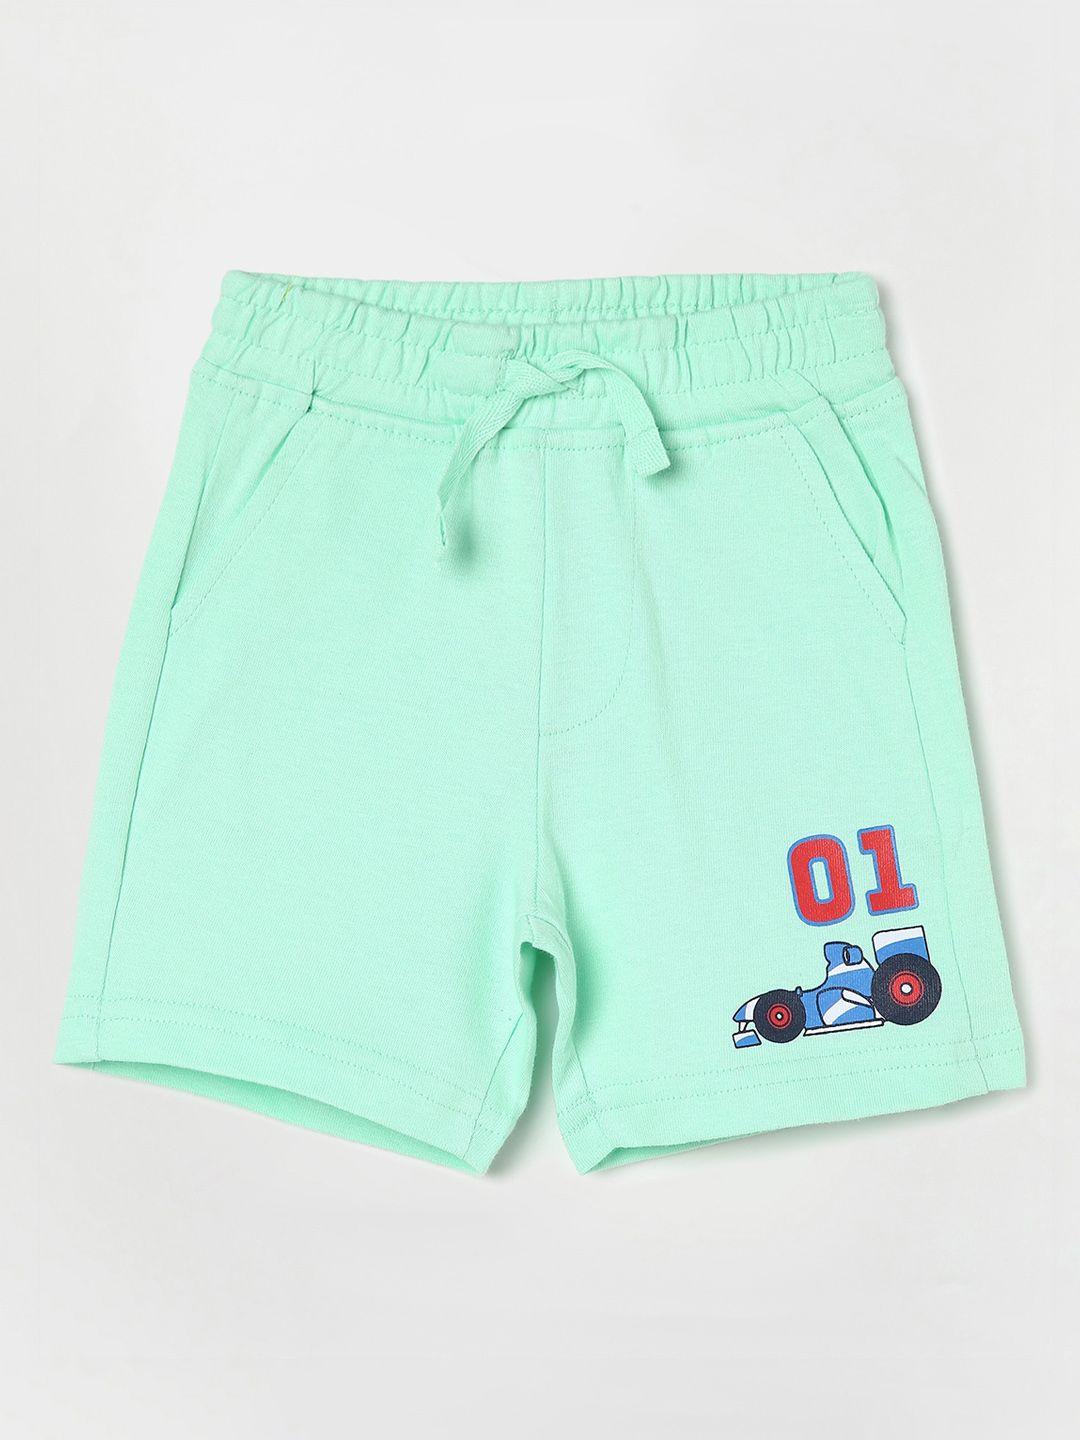 juniors-by-lifestyle-boys-mid-rise-cotton-shorts